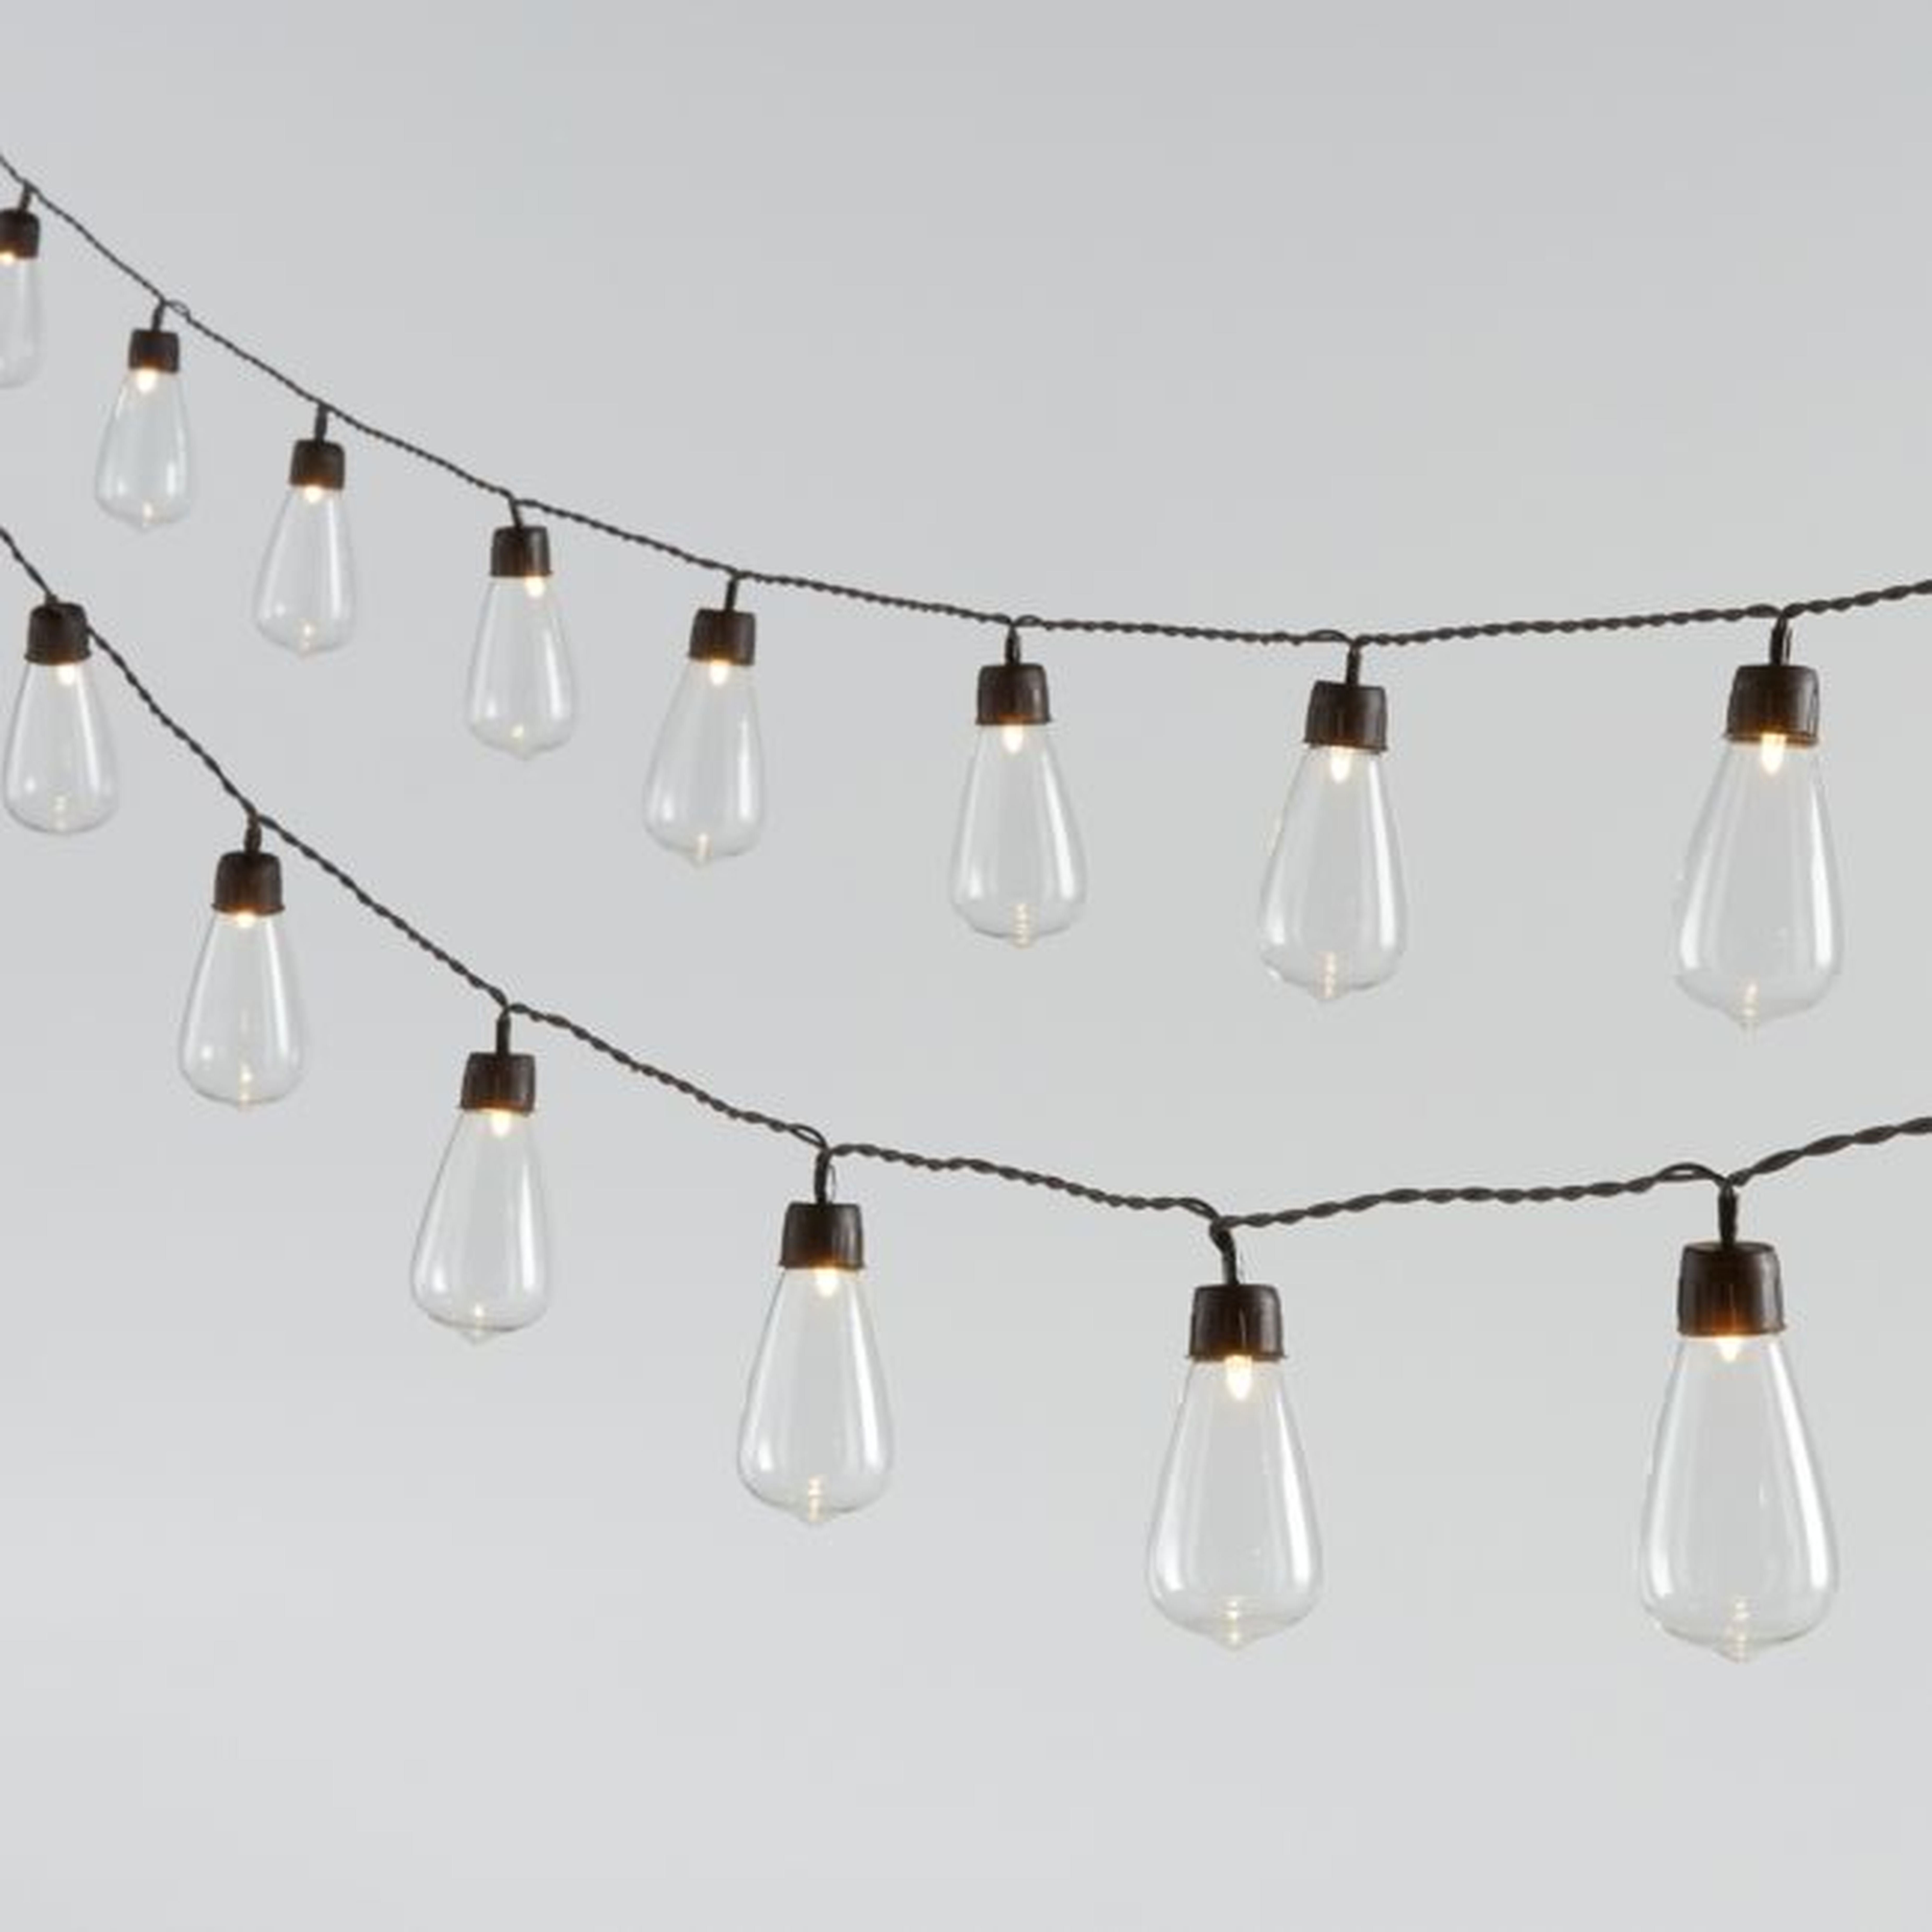 20-Count Solar Drop String Lights, Set of 2 - Crate and Barrel